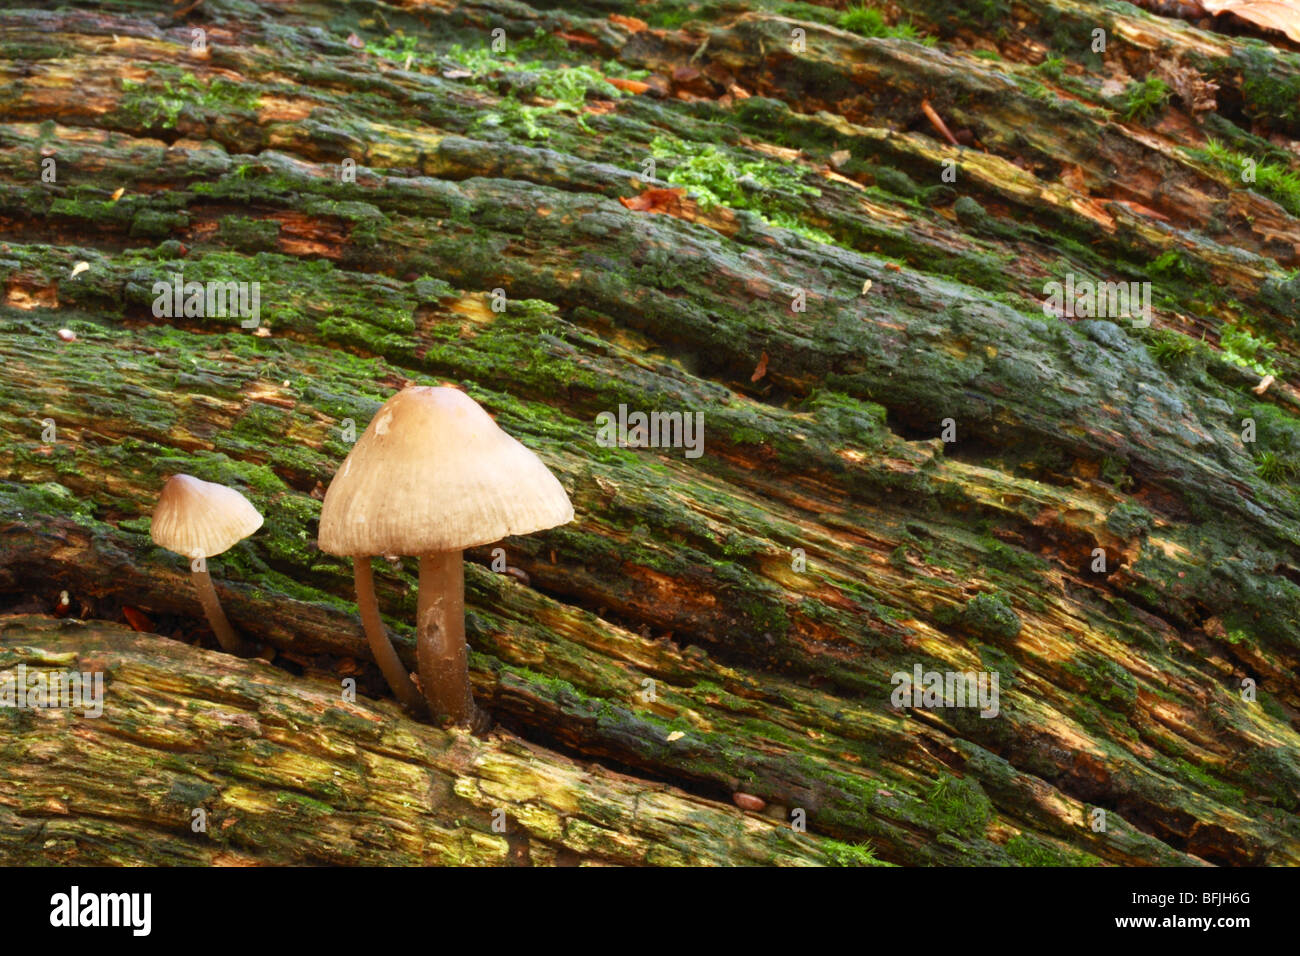 Wild mushrooms growing on a decaying tree trunk. Downley Woods, Buckinghamshire, United Kingdom Stock Photo